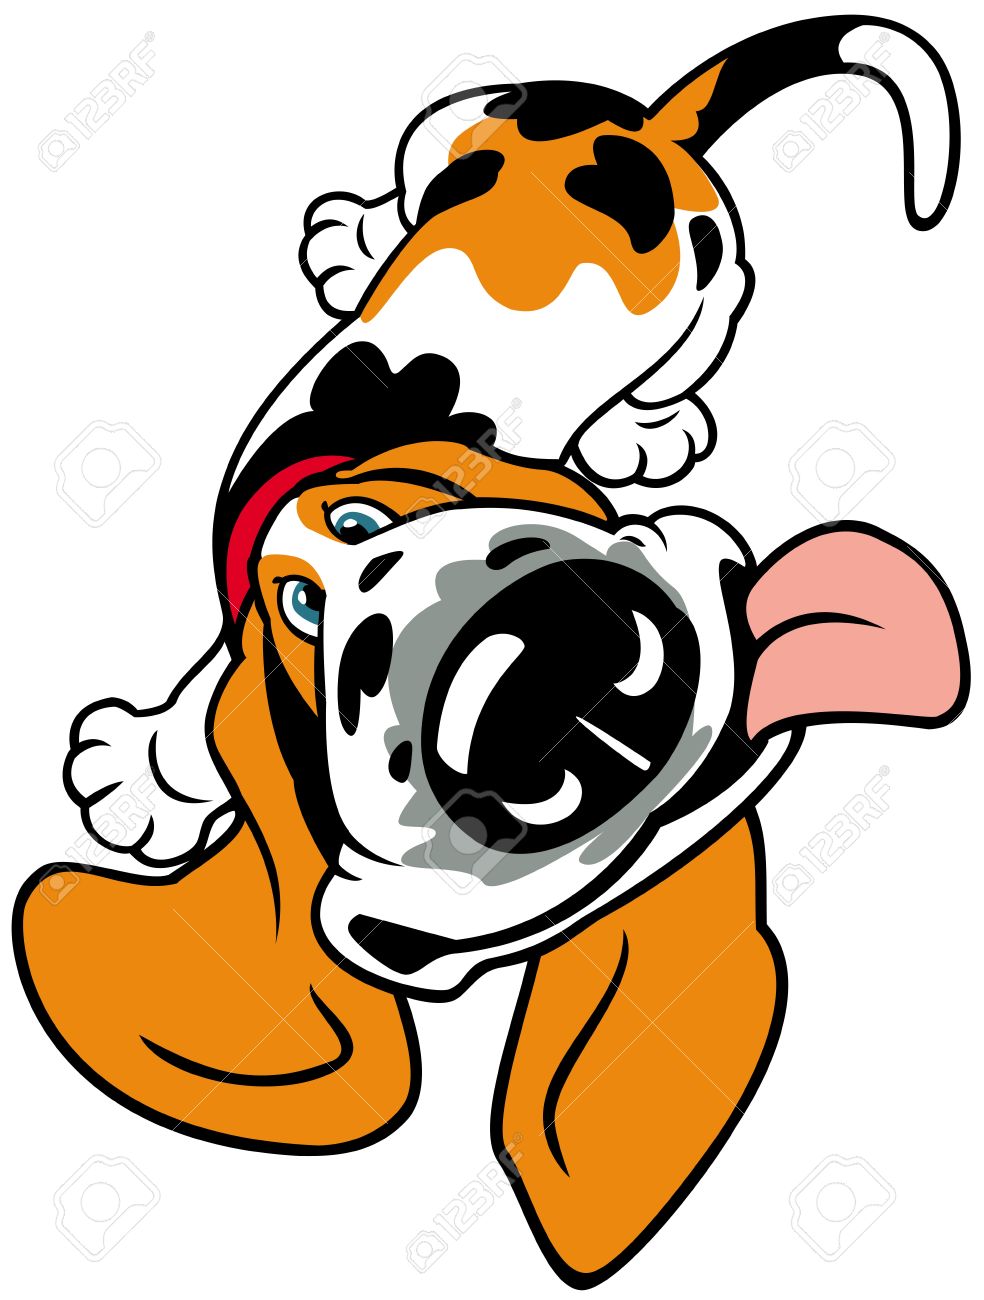 Basset Hound clipart #1, Download drawings